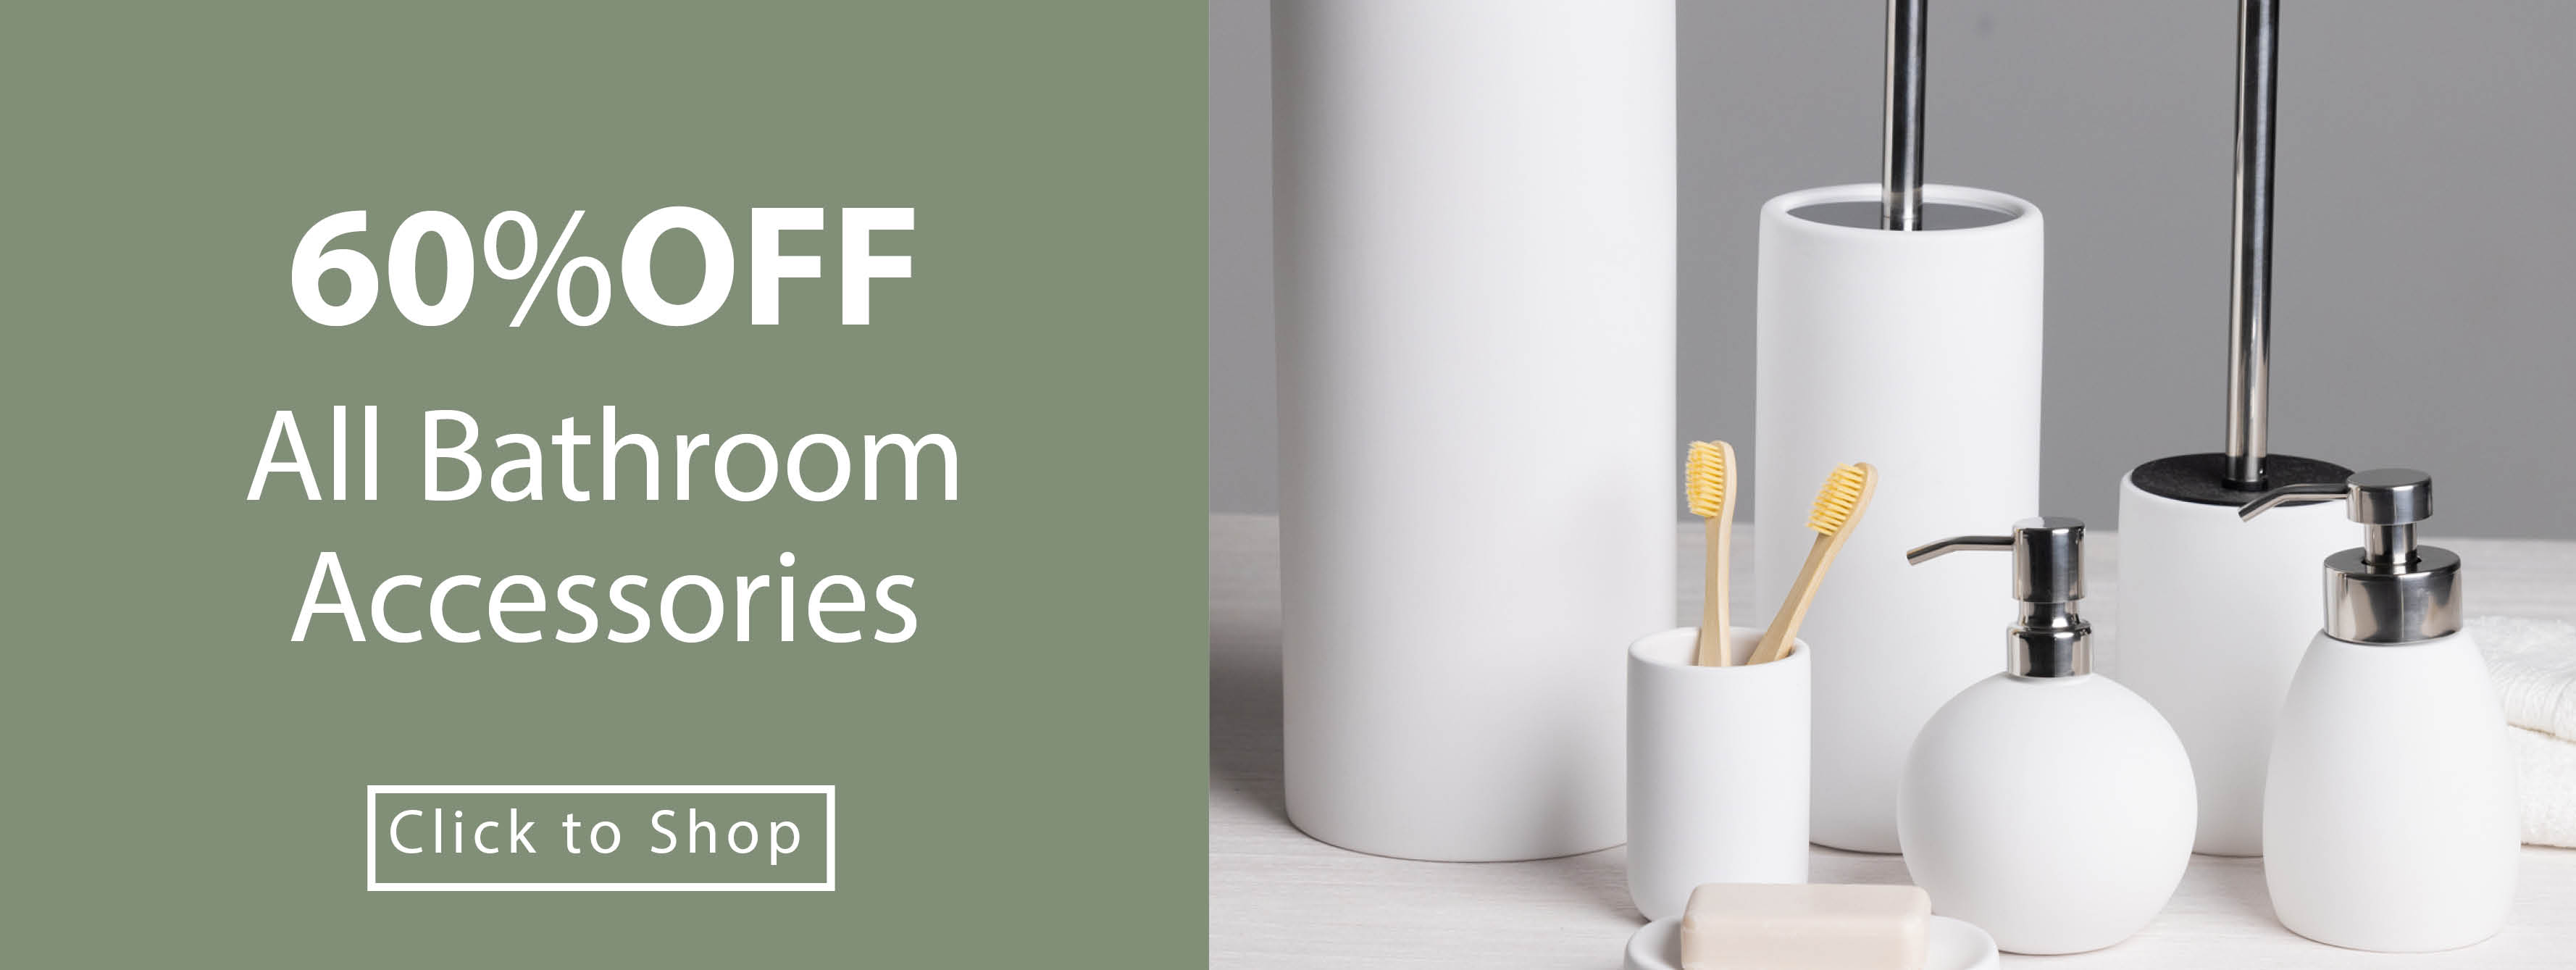 60% Off All Bathroom Accessories